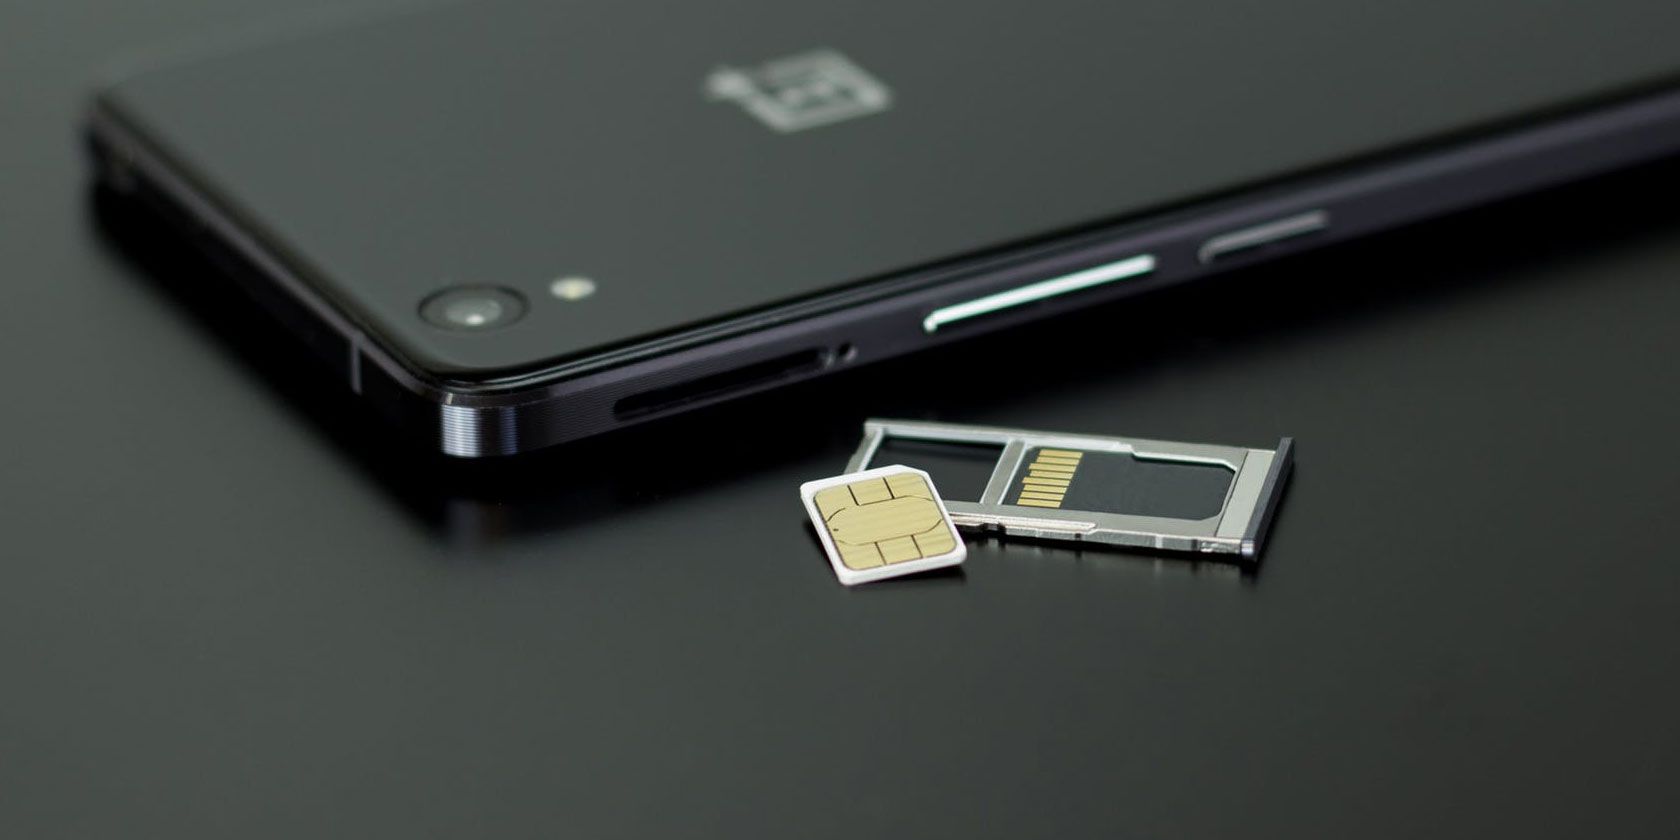 SIM card and slot on a phone